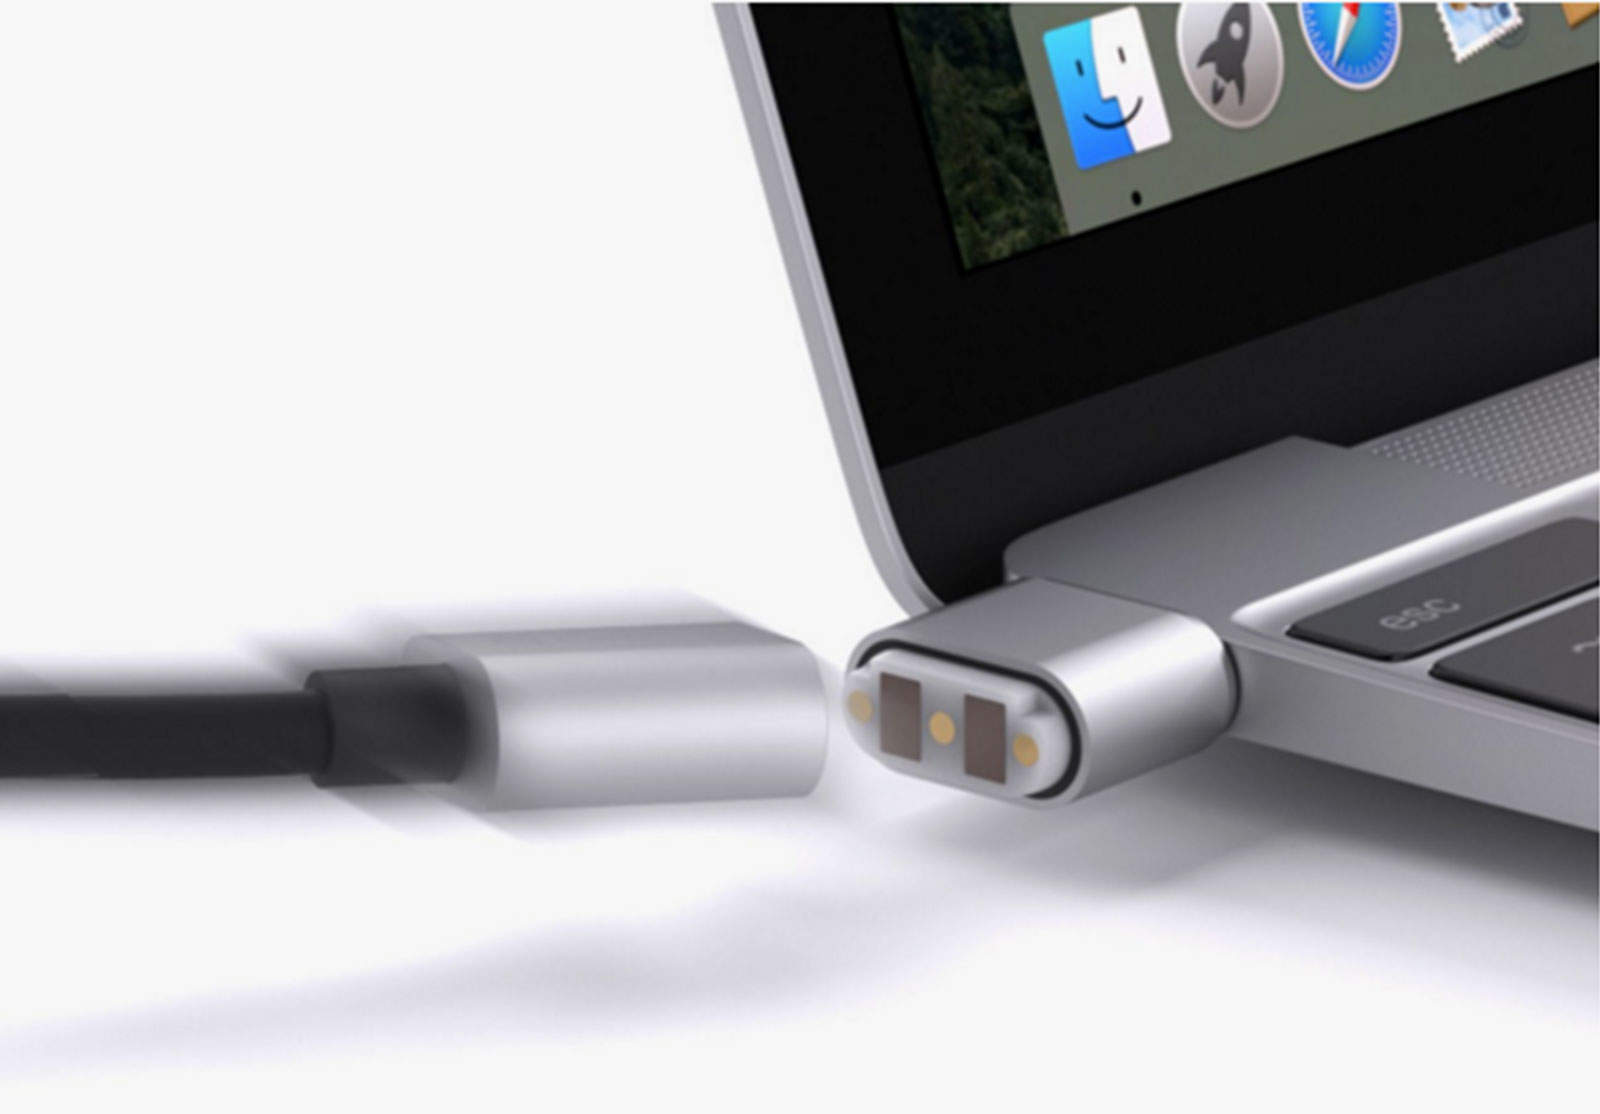 When Apple left off MagSafe connection to its USB-C MacBook, Griffin came up with a solution.